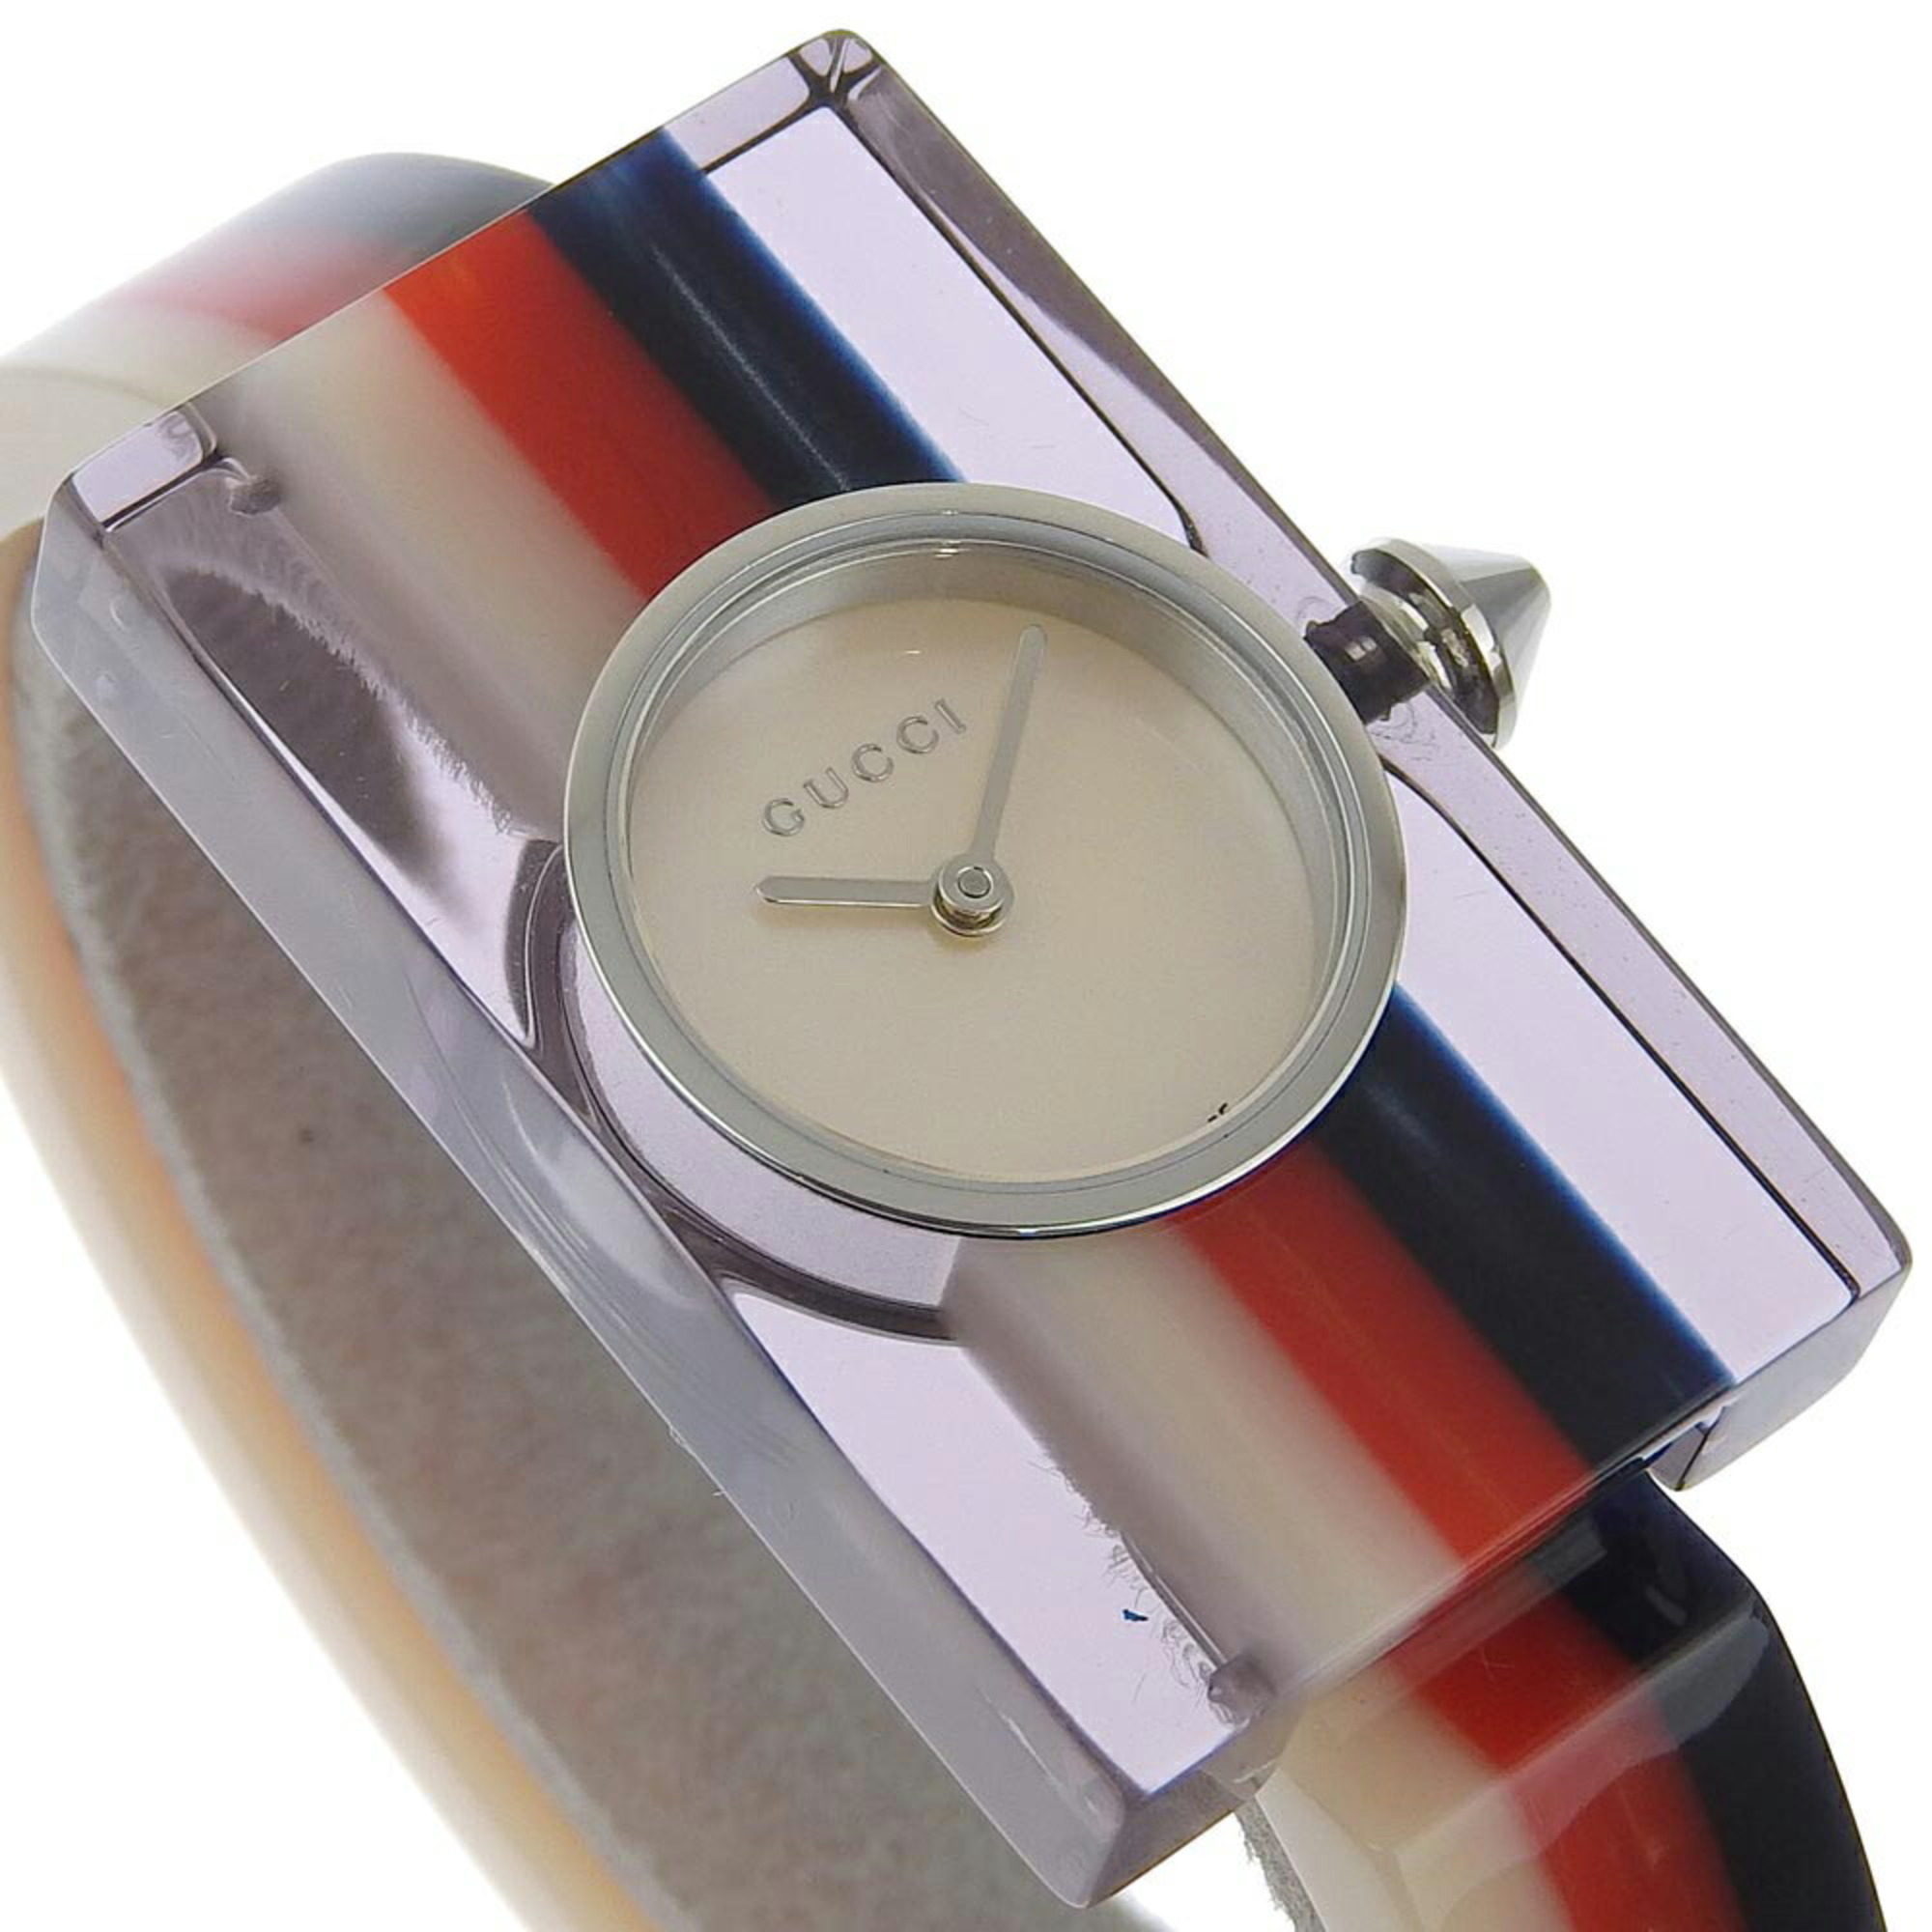 GUCCI Vintage Web Watch Bangle 143.5 Stainless Steel x Plastic Swiss Made White/Red/Navy Quartz Analog Display Silver Shell Dial web Ladies